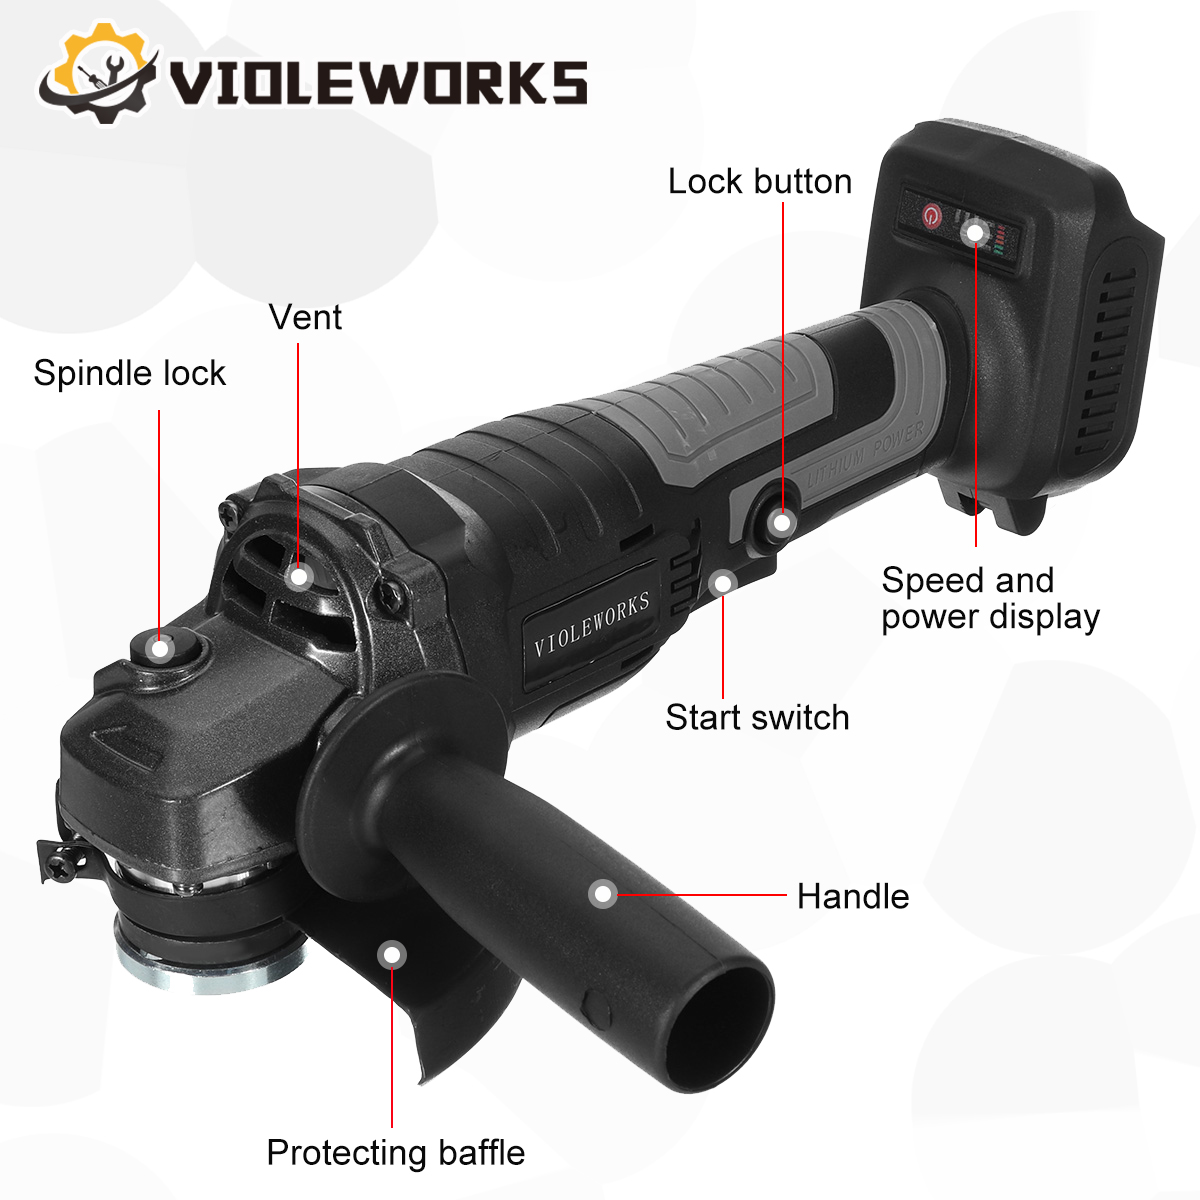 VIOLEWORKS-288VF-125mm-Cordless-Angle-Grinder-3-Gears-Brushless-Electric-Metal-Stone-Wood-Cutting-Po-1839464-10